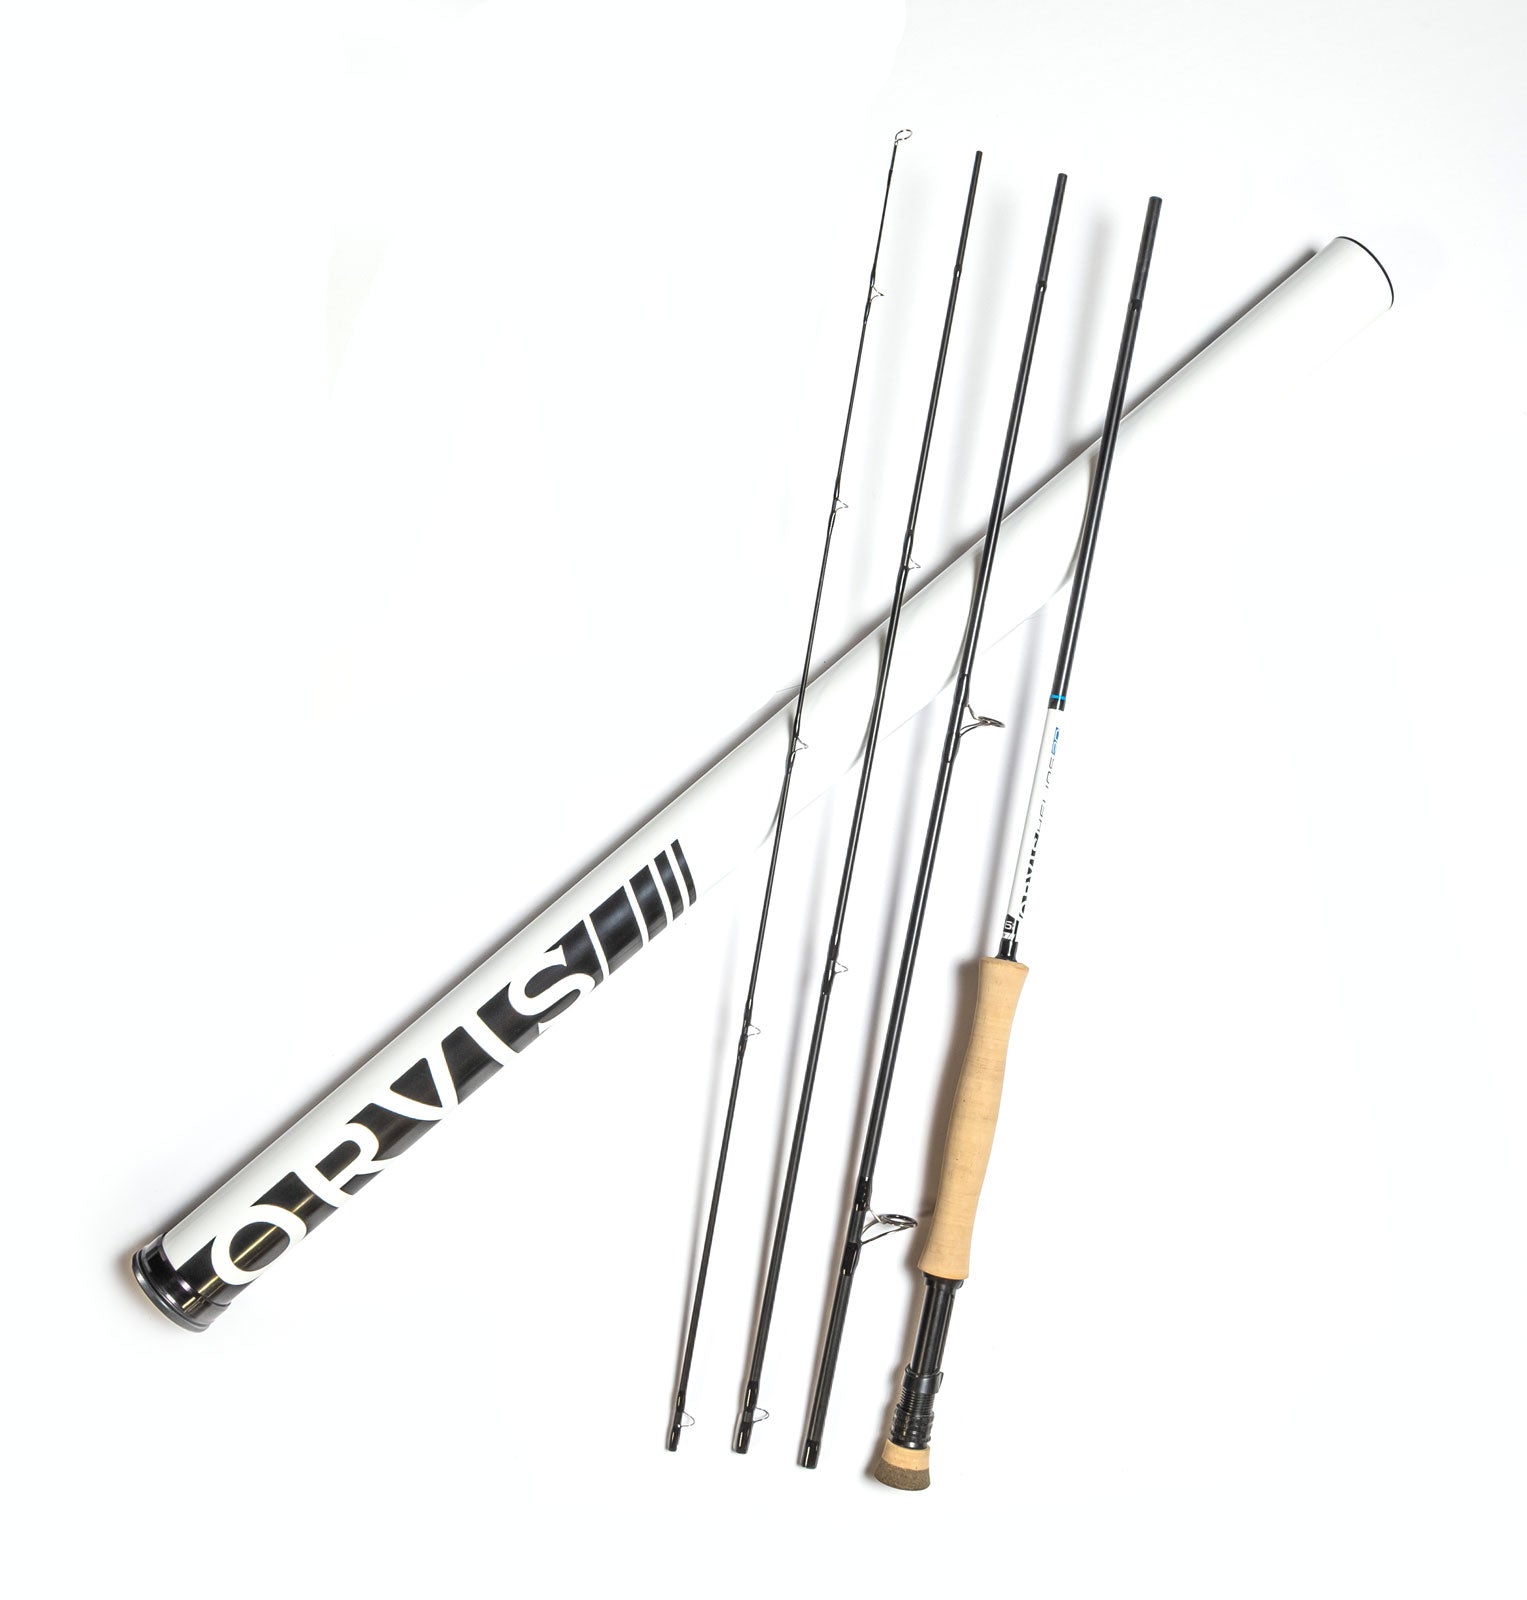 Helios™ D 10' 5-Weight Fly Rod Outfit